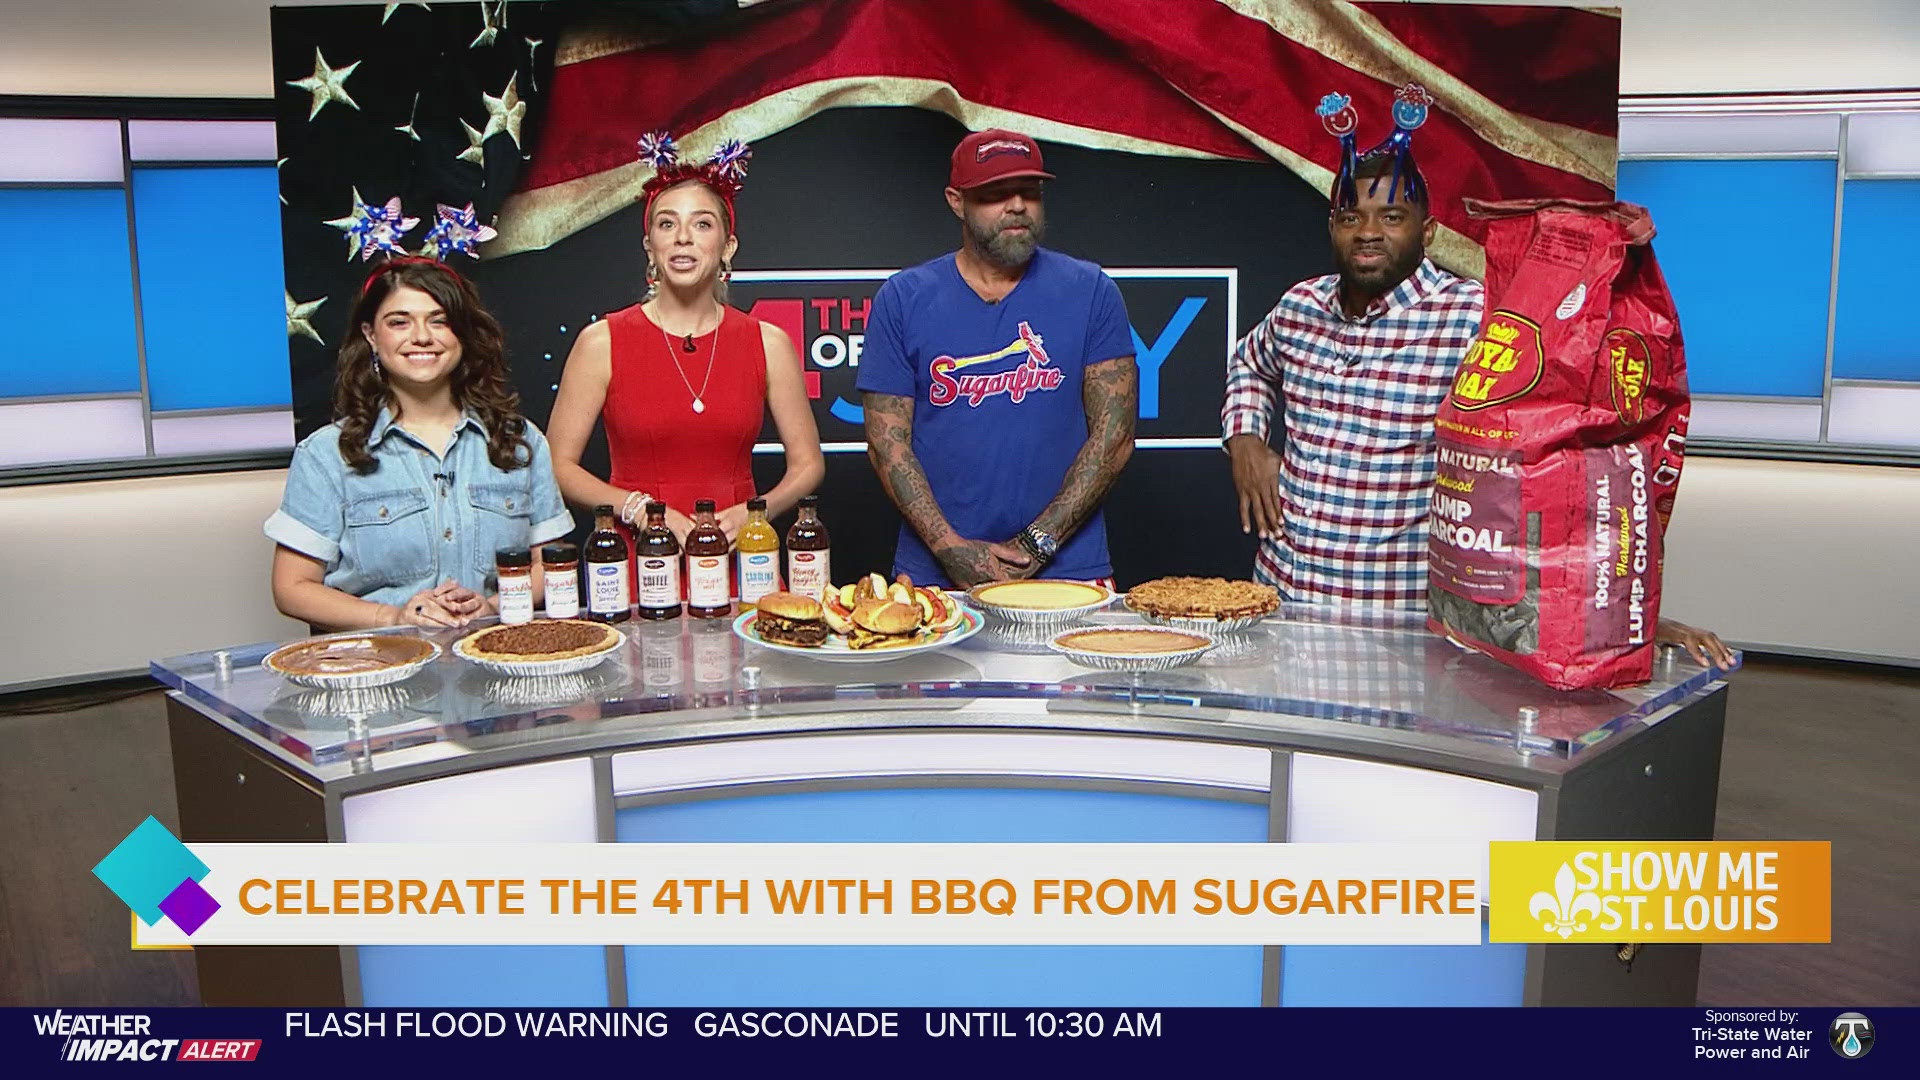 It's a party in the Show Me Studio! Chef Mike Johnson from Sugarfire Smokehouse joined us live in the studio to share some grilling tips and their tasty burgers.